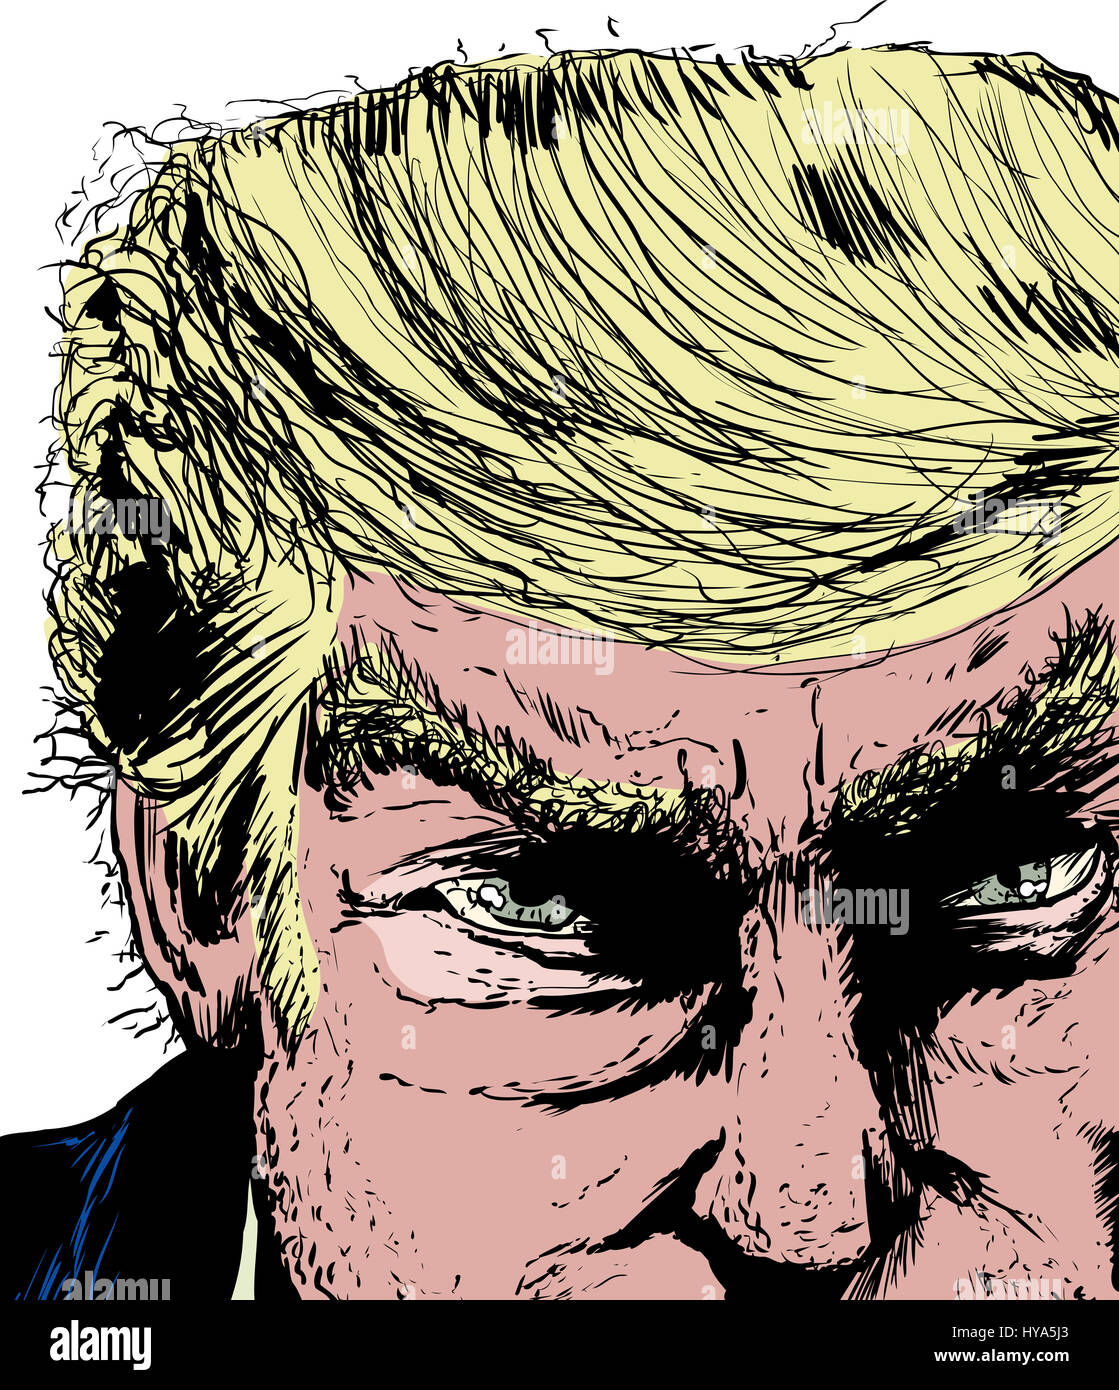 April 1, 2017. Close up sketch on face of Donald Trump scowling Stock Photo